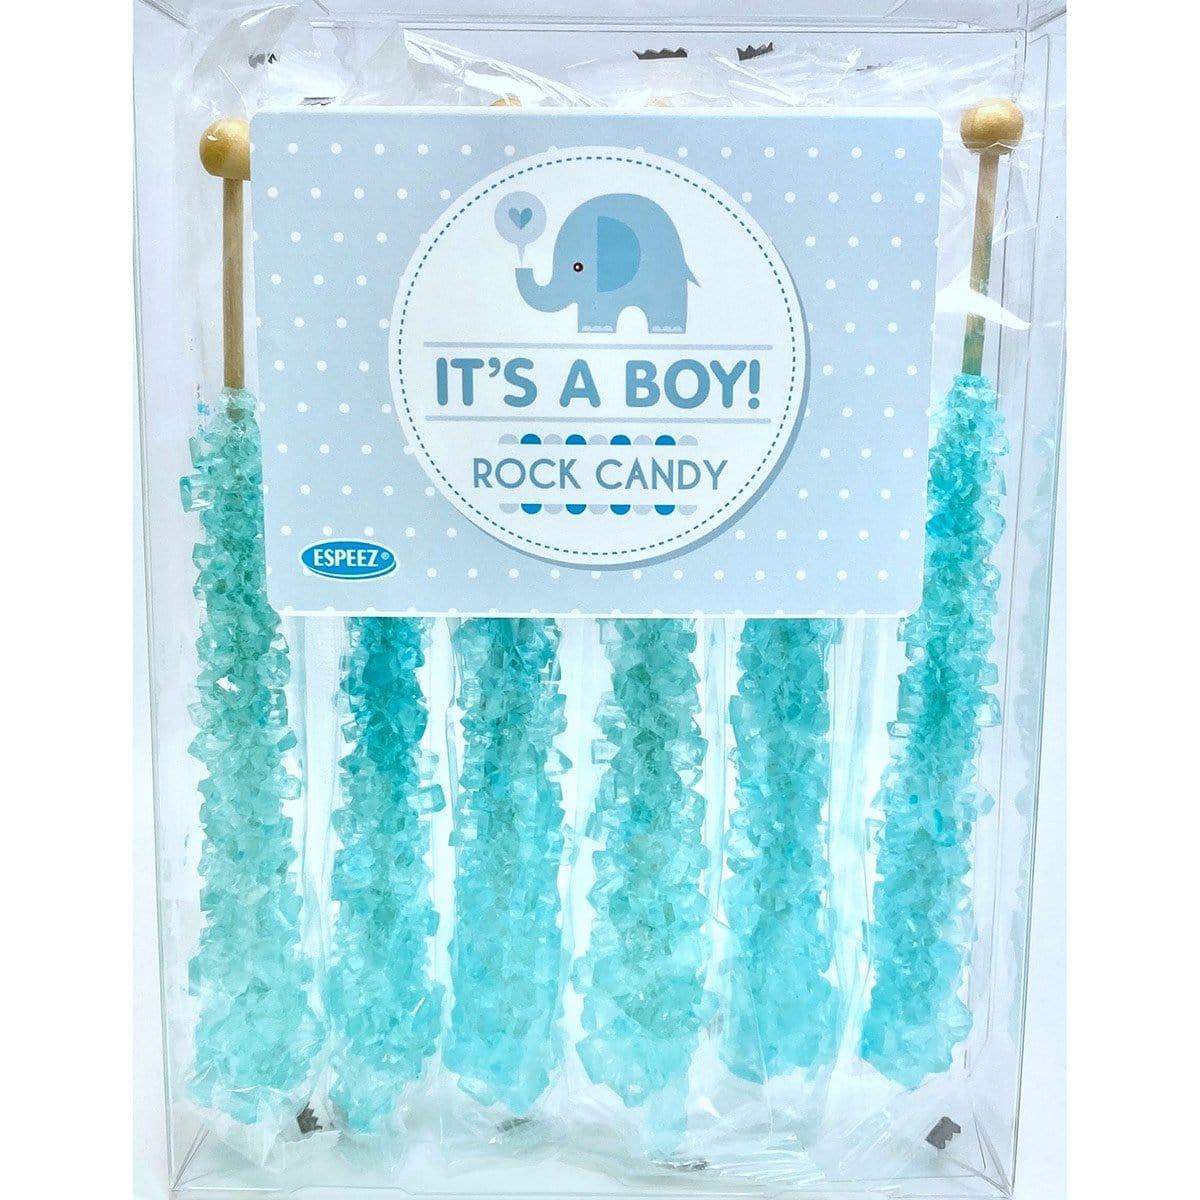 Buy Candy Blue Rock Candy On Stick, 6 Count sold at Party Expert